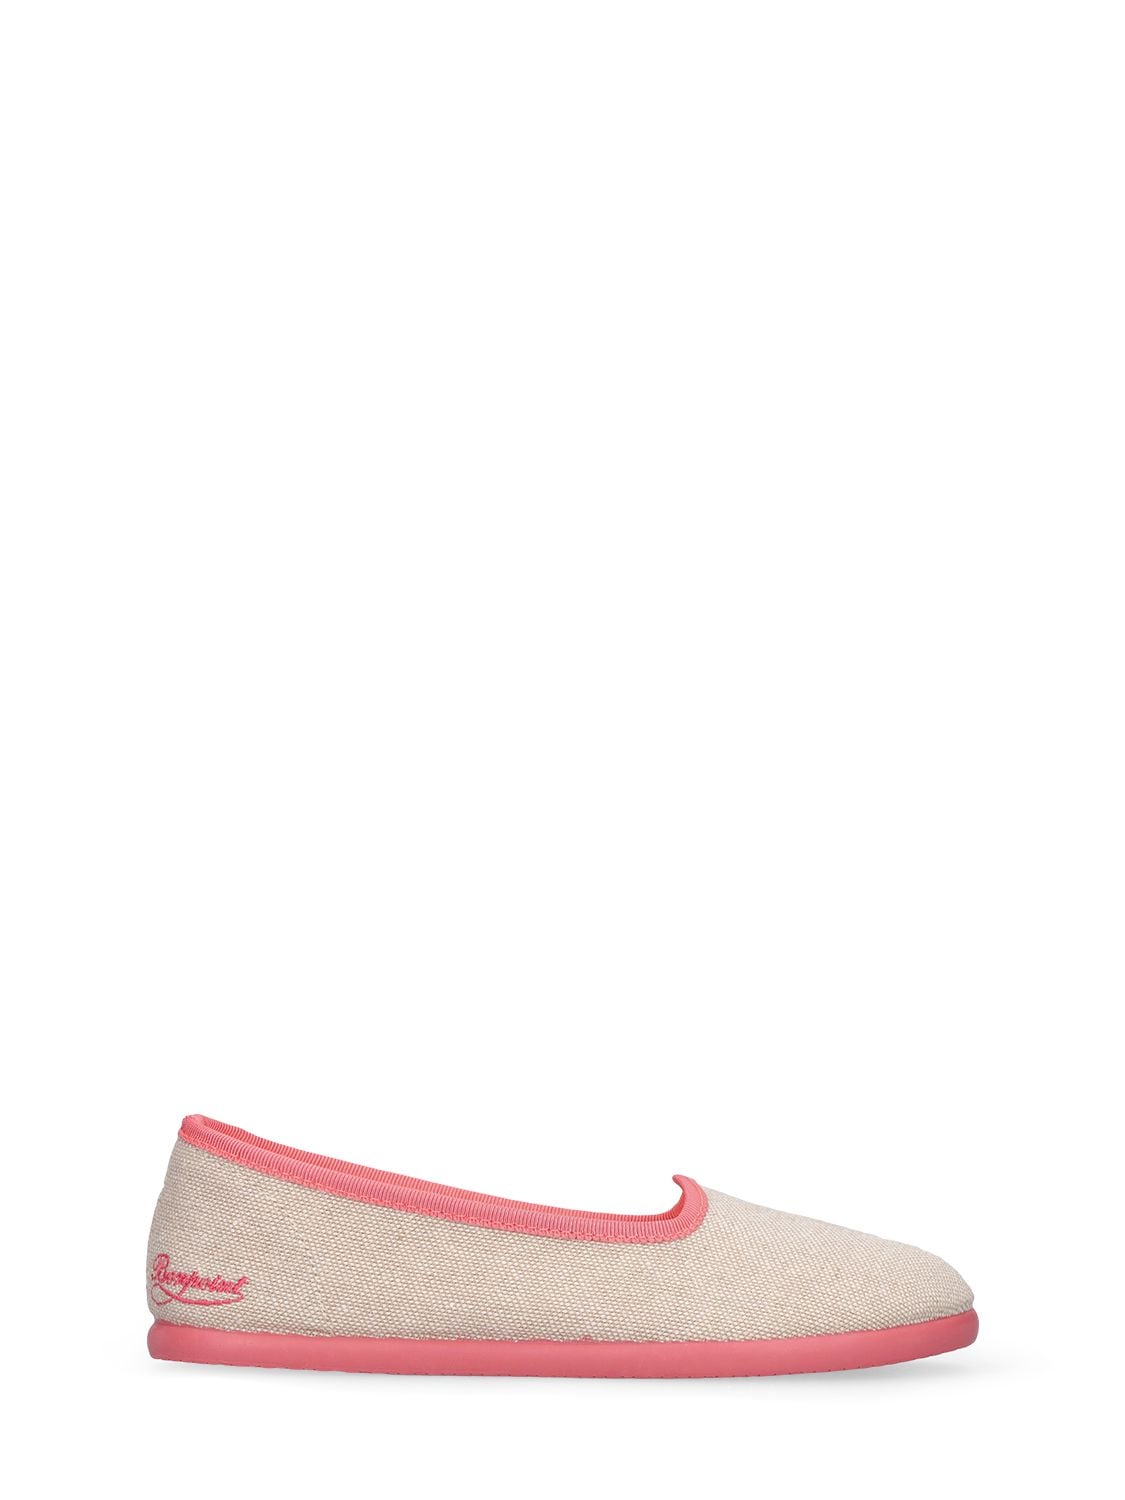 BONPOINT COTTON LOAFERS